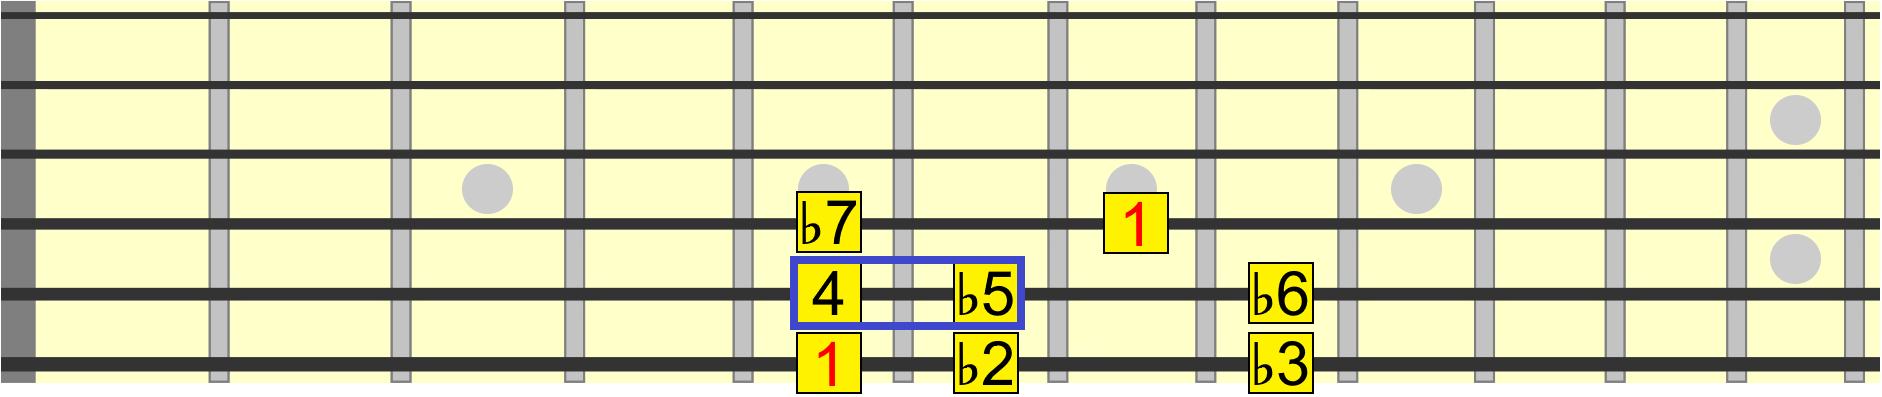 Locrian scale with a diminished 5th interval